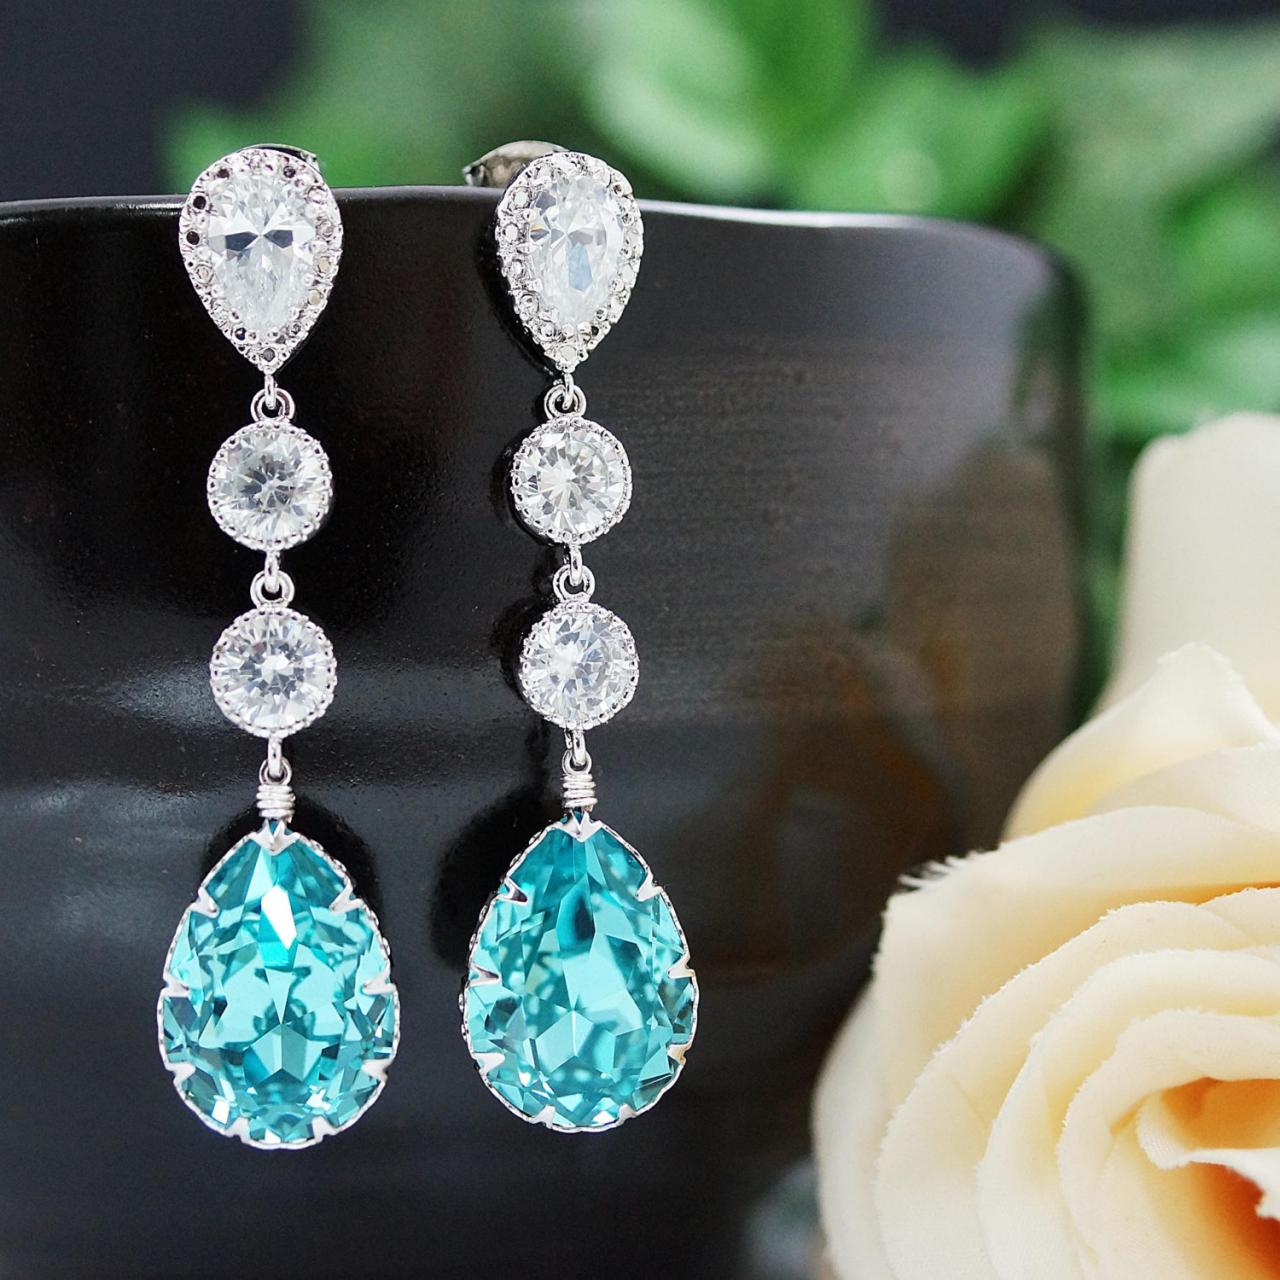 Wedding Bridal Jewelry Bridal Earrings Bridesmaids Gift Dangle Earrings Cubic Zirconia Connectors And Light Turquoise Swarovski Tear Drop